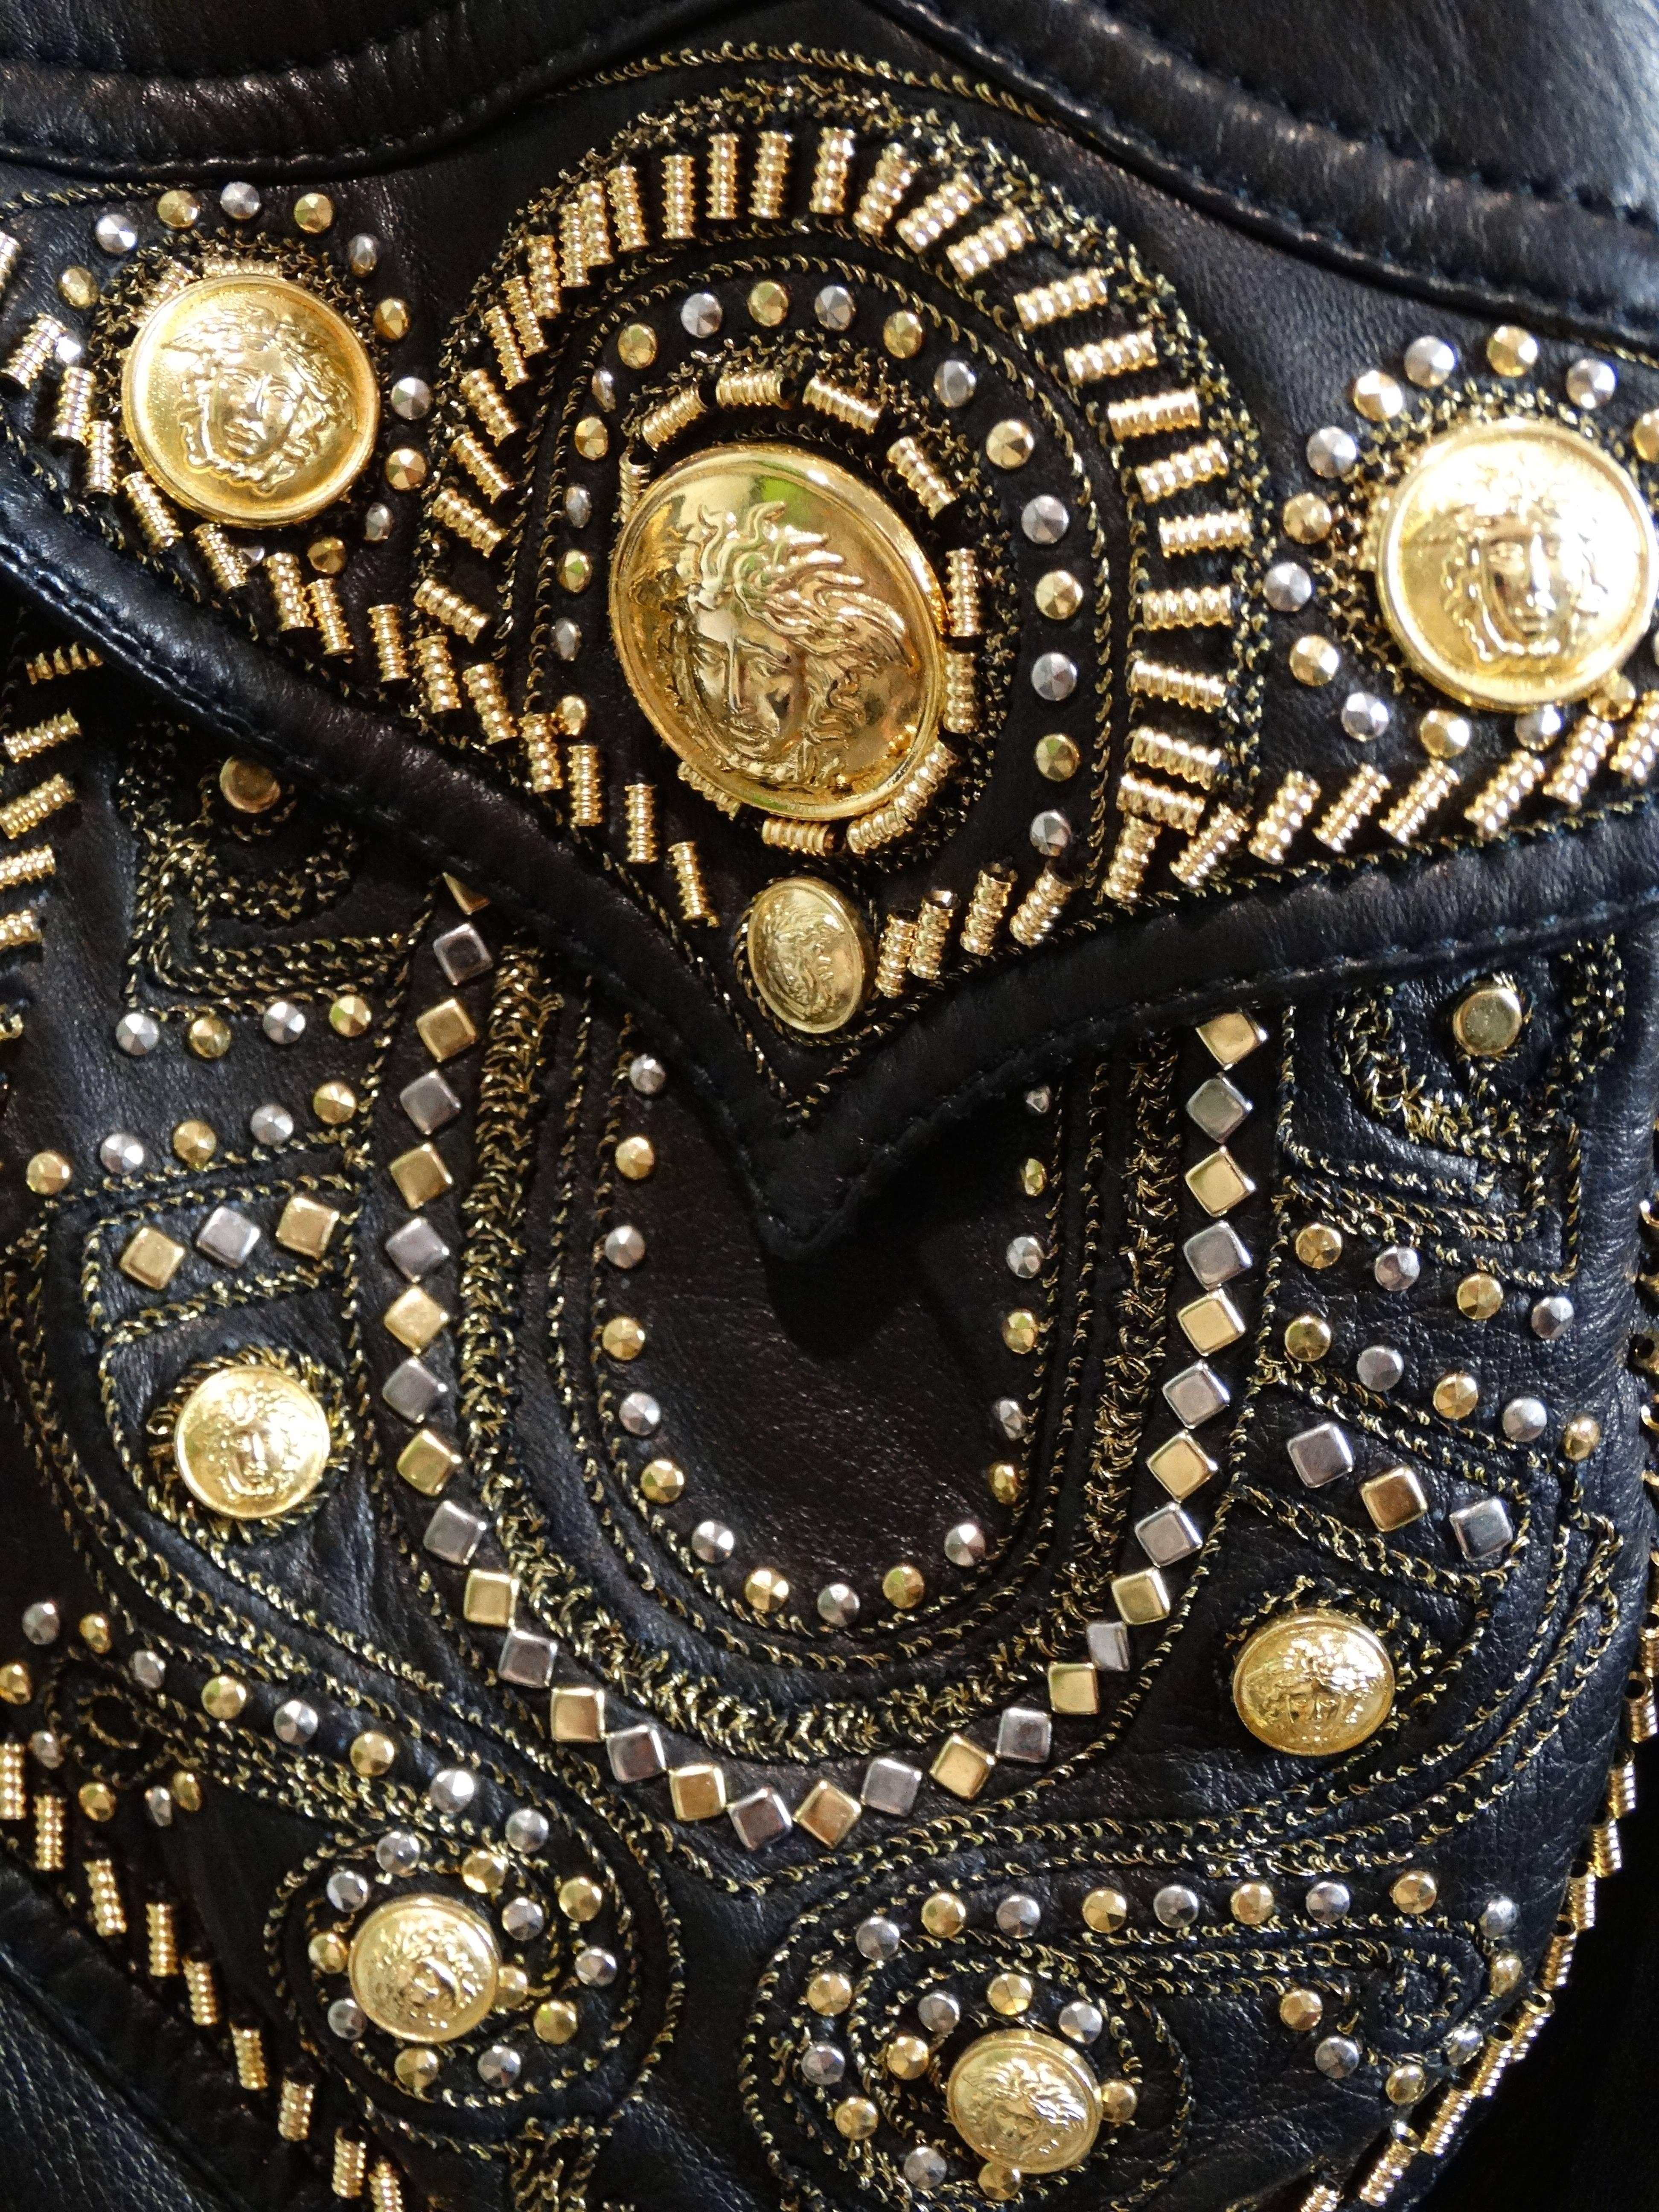 1990s Gianni Versace Couture Motorcycle Jacket  1